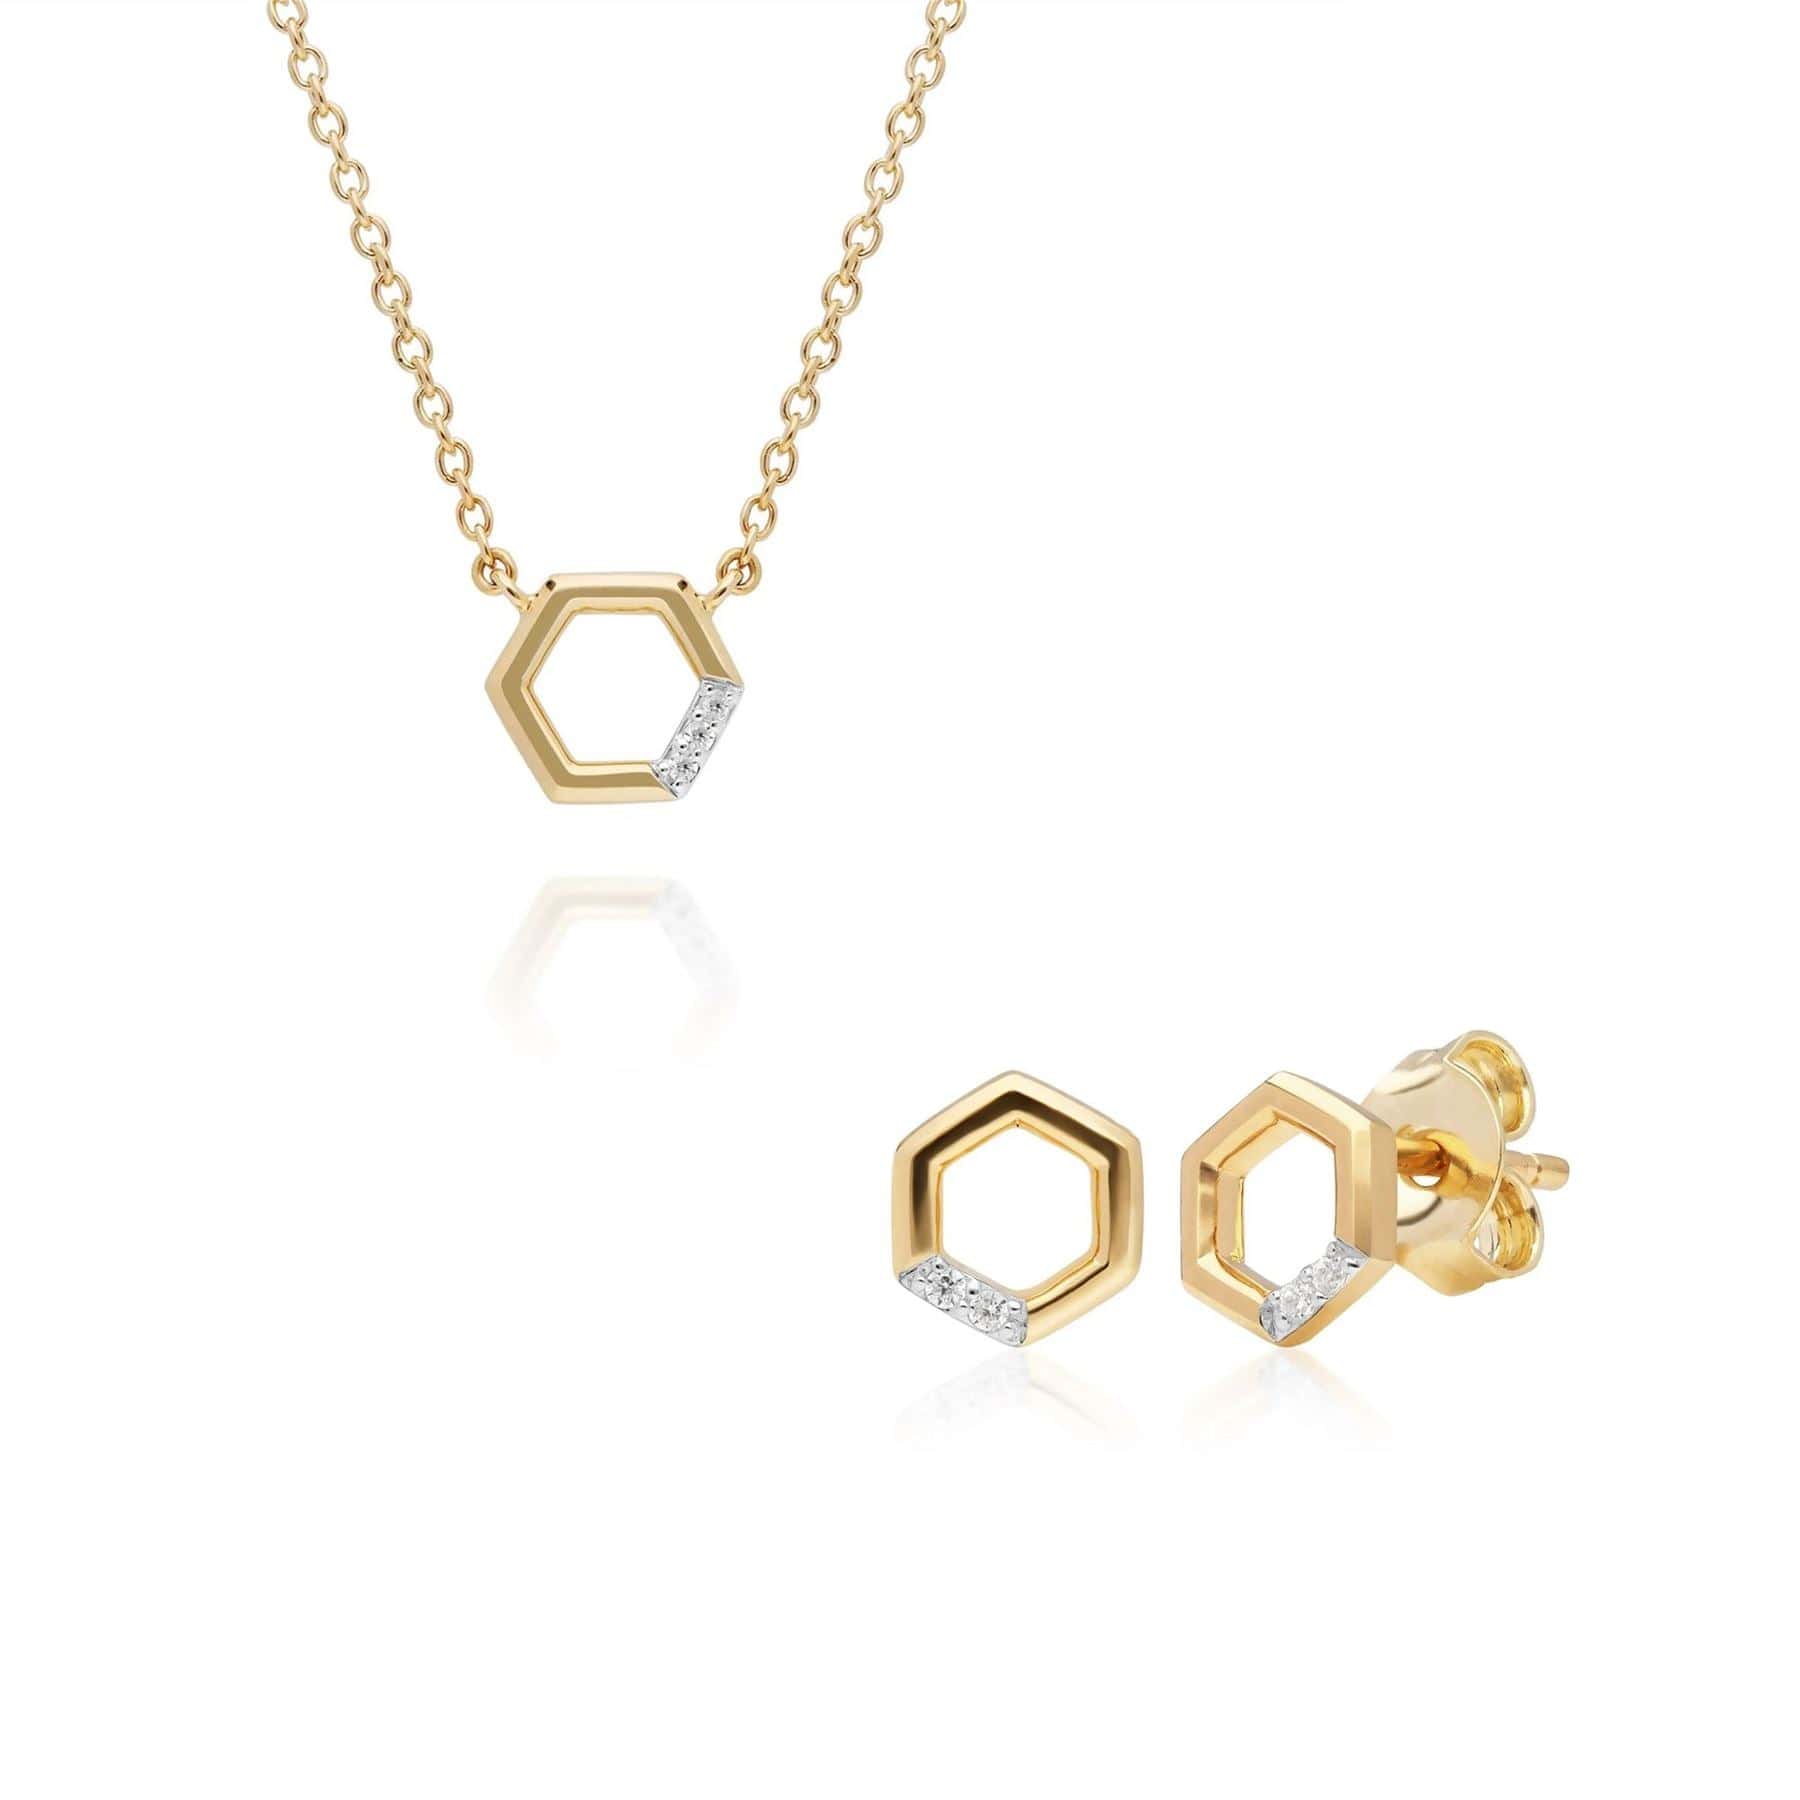 191N0226029-191E0392029 Diamond Pave Hexagon Necklace & Stud Earring Set in 9ct Yellow Gold 1